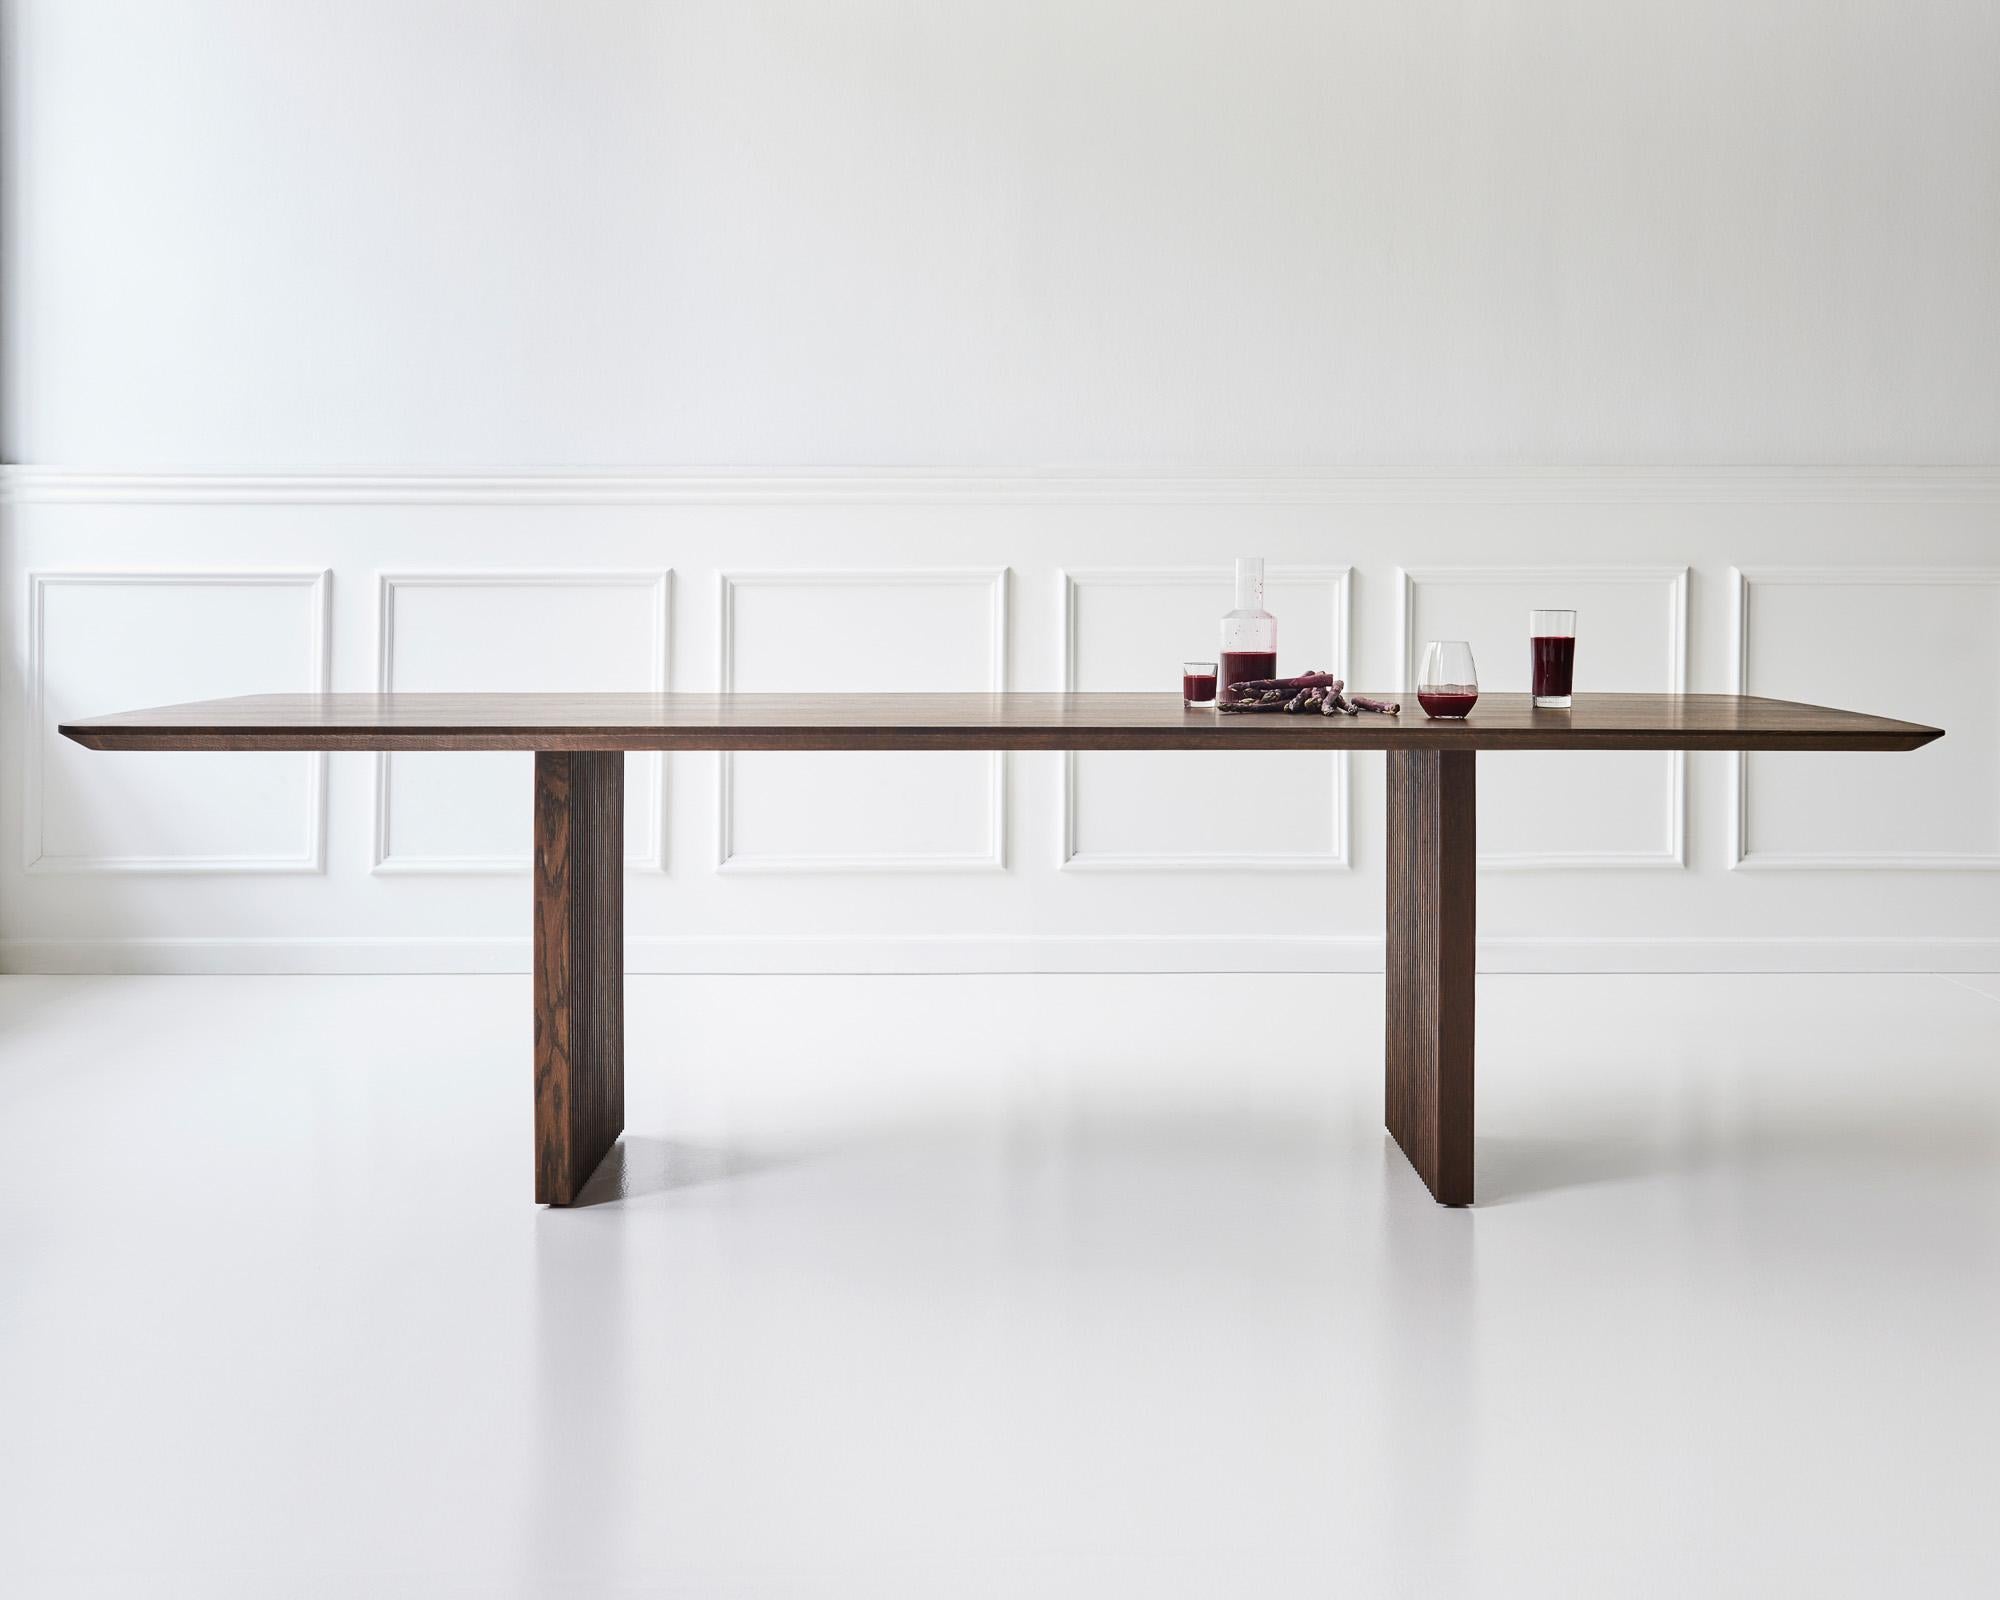 TEN dining table, rectangular, 200cm.
Solid wood tabletop and legs. Handmade in Denmark. 

Height: 72 or 74 cm

Tabletop dimensions:
– 200 x 95 cm
– 240 x 105 cm
– 270 x 105 cm
– 300 x 105 cm
– 340 x 105 cm
– 370 x 105 cm
– 400 x 105 cm

Tabletop’s